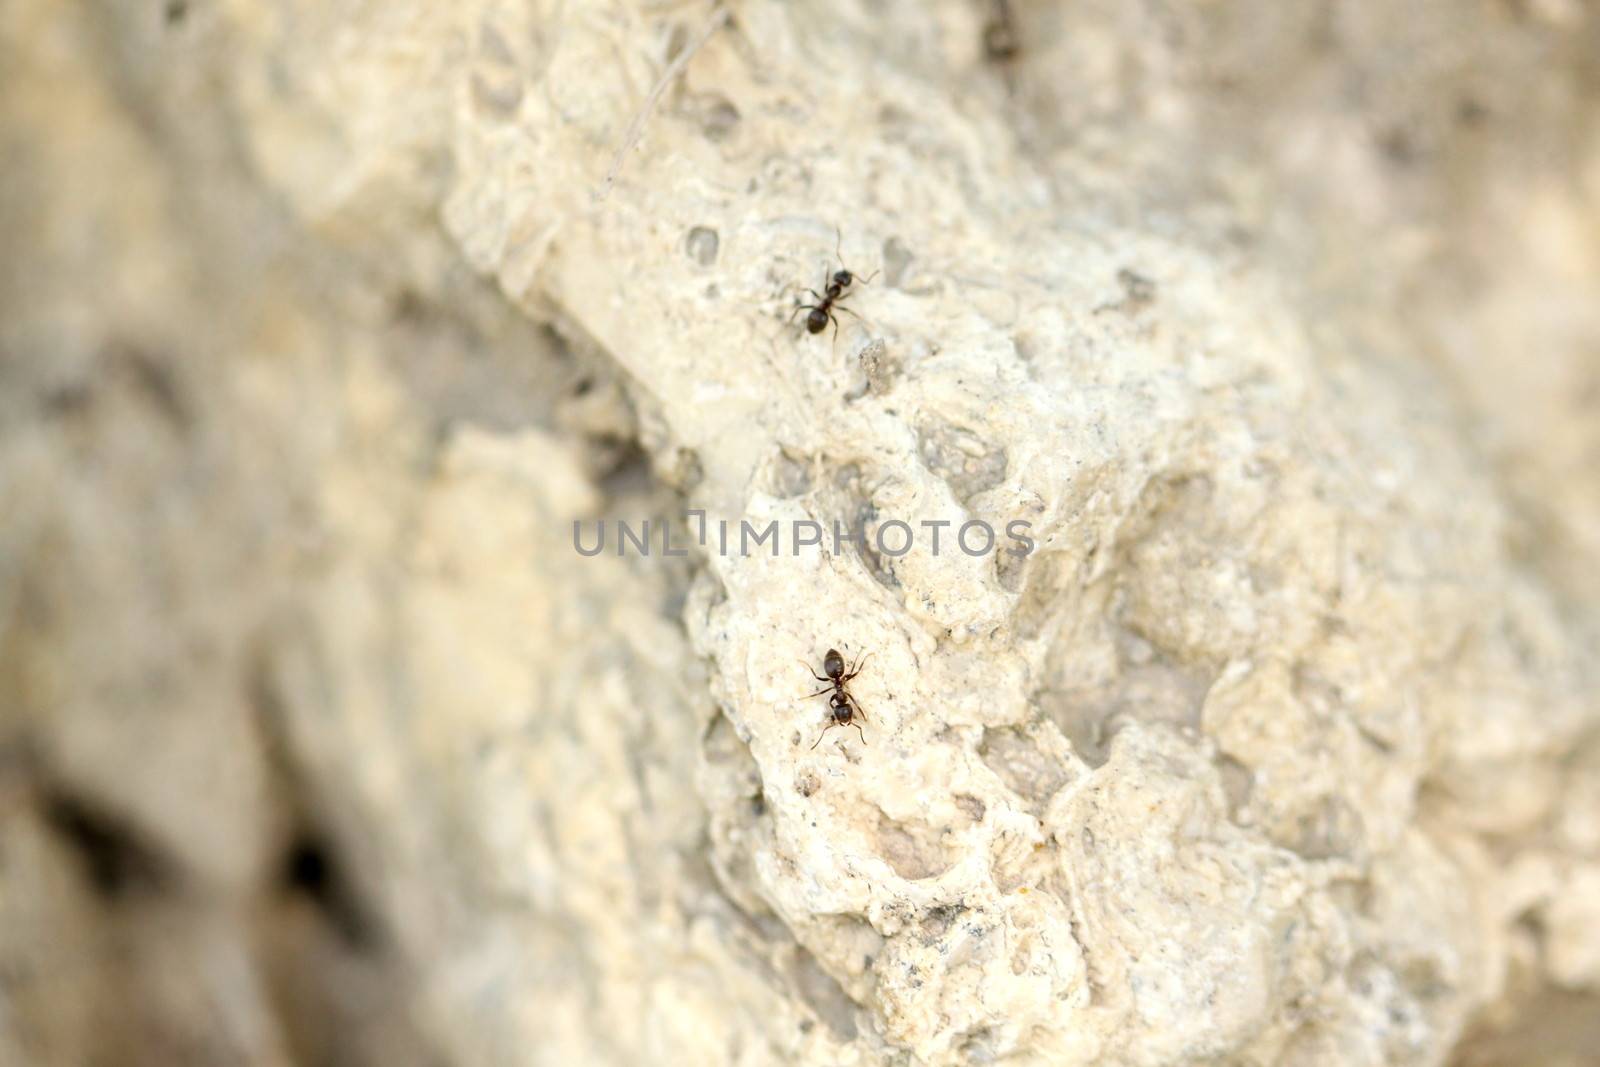 ants on the rock, macro view by indigolotos